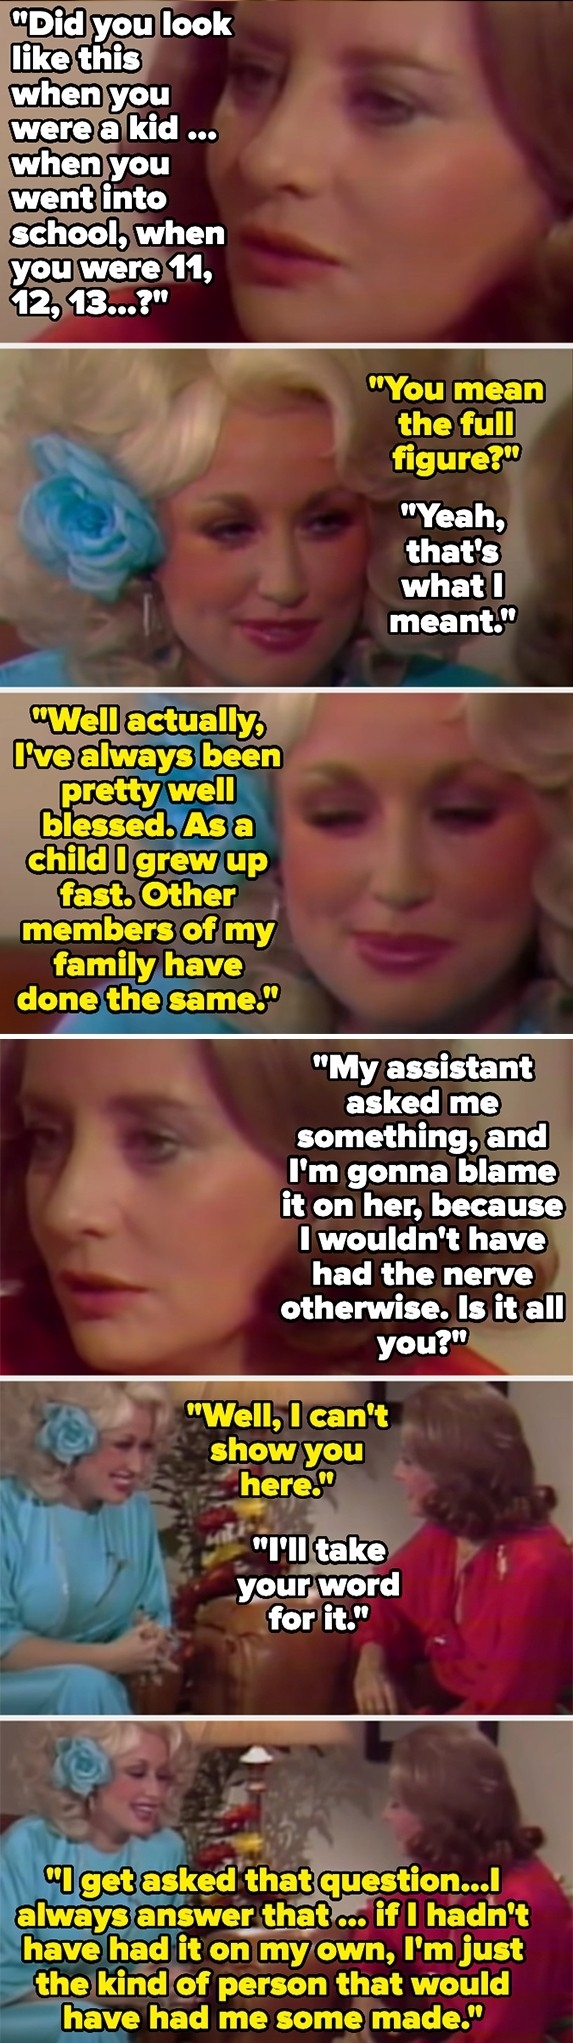 dolly joking back after being asked the insensitive question